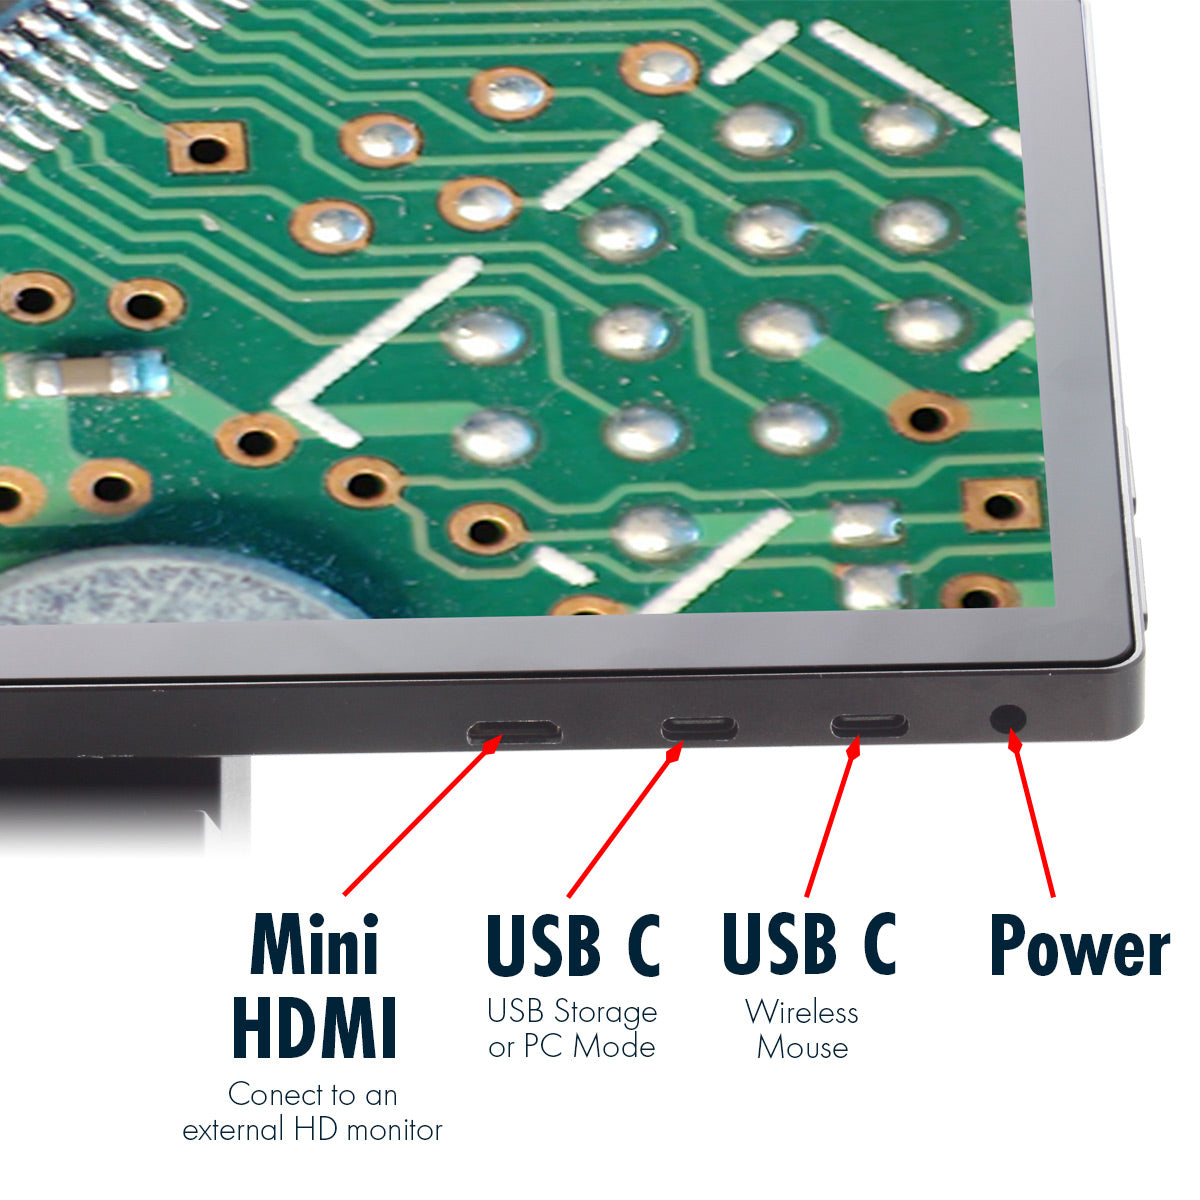 USB and HDMI Outputs